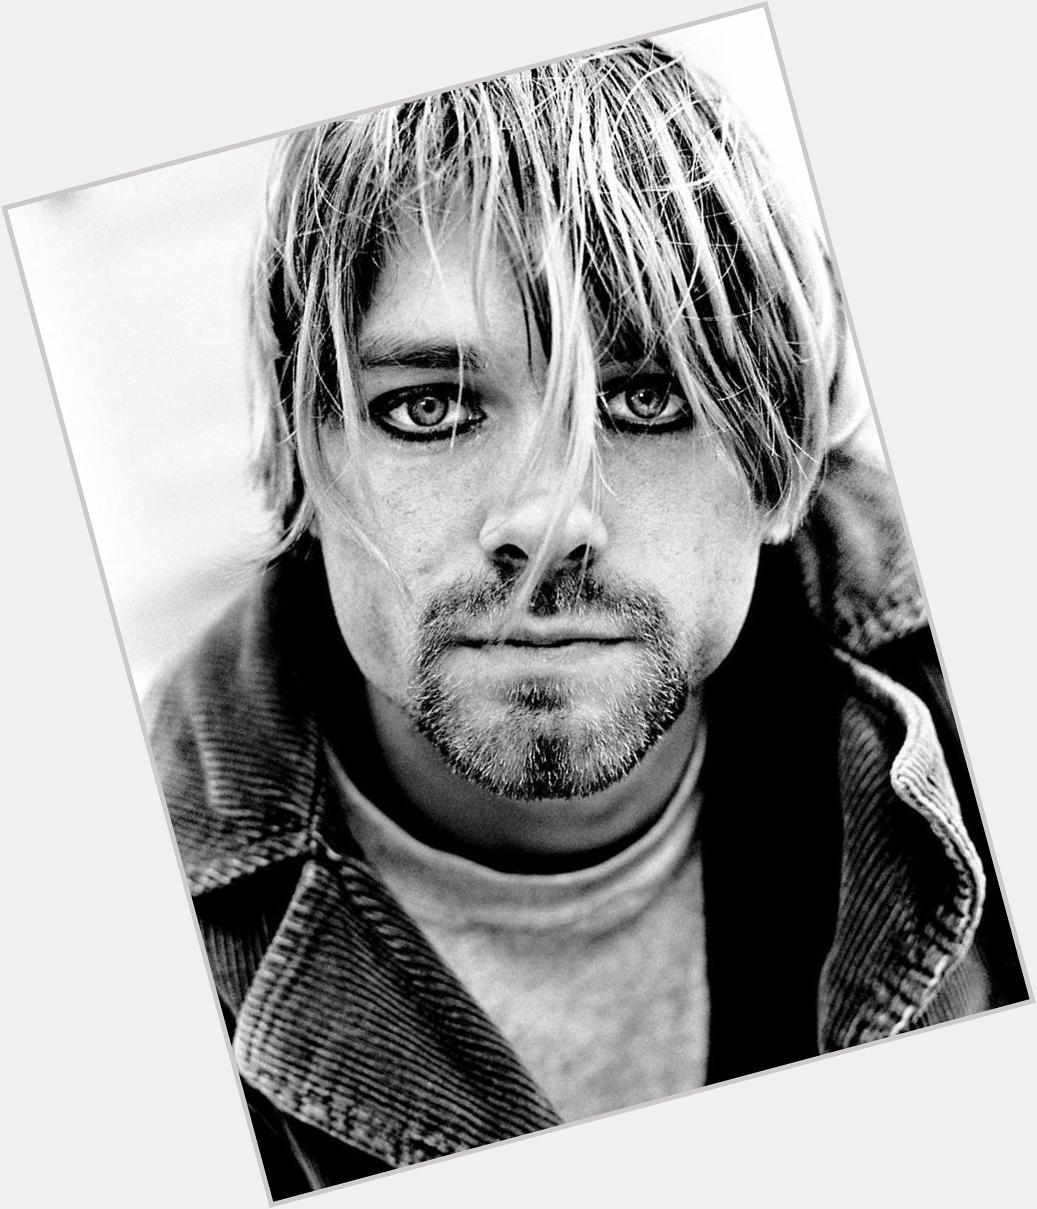 Happy Birthday to the legend Kurt Cobain, who would\ve been 54 today 